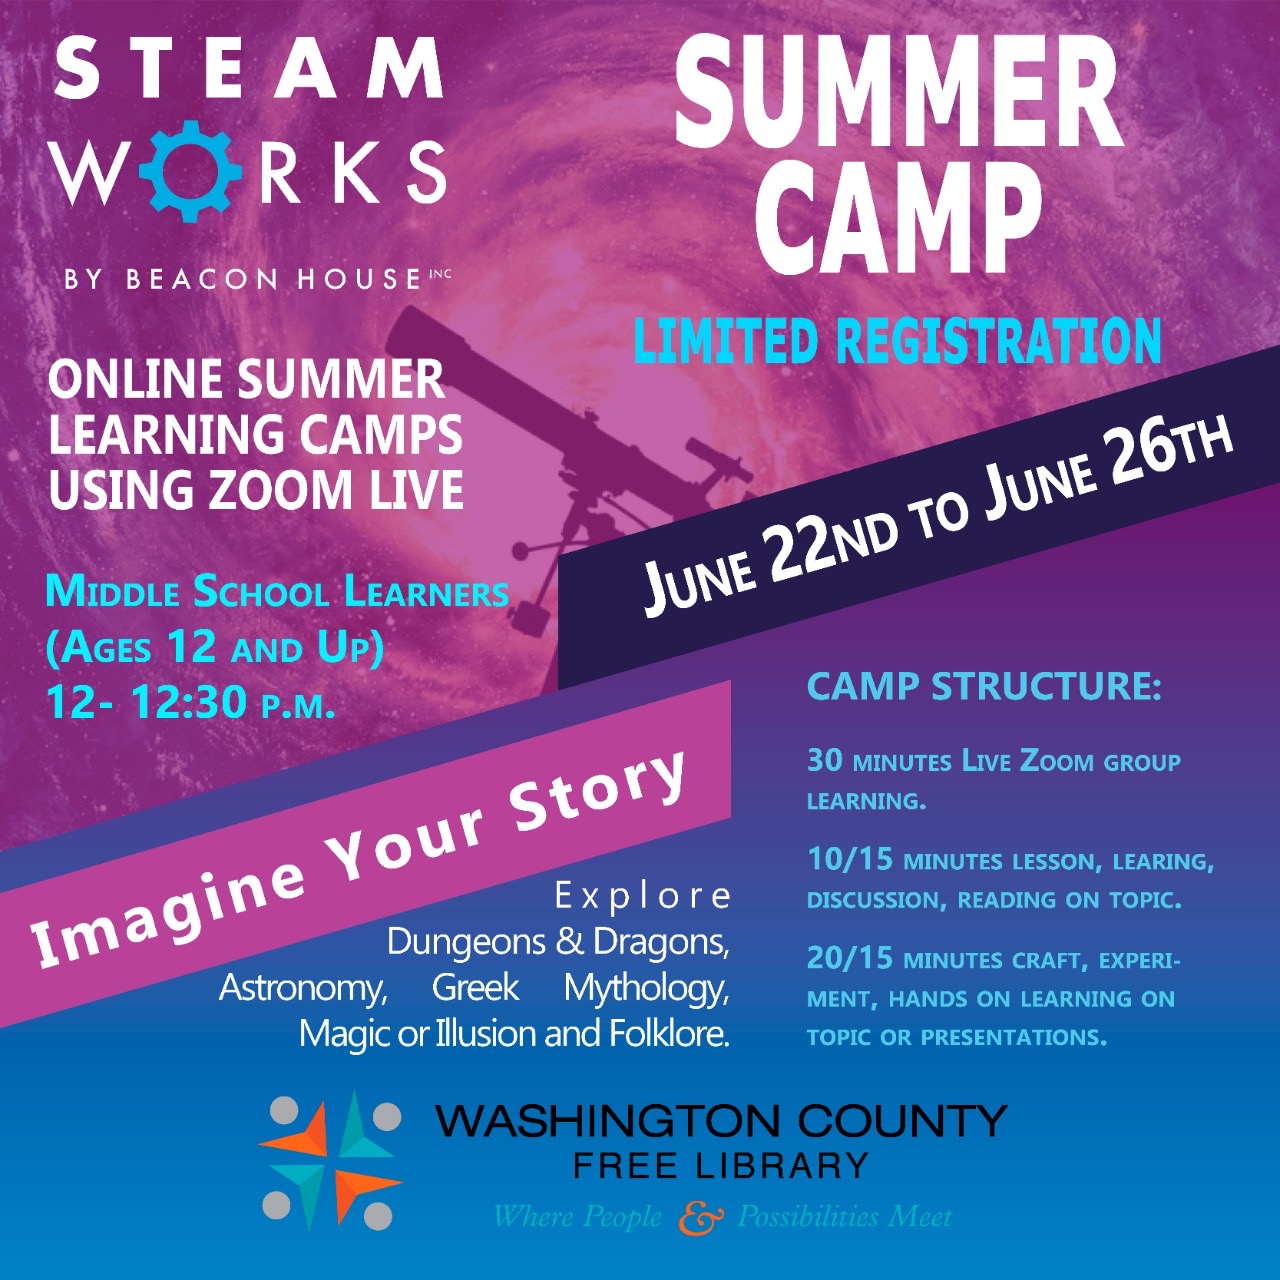 SteamWorks Summer Camp by Beacon House - Age 12+